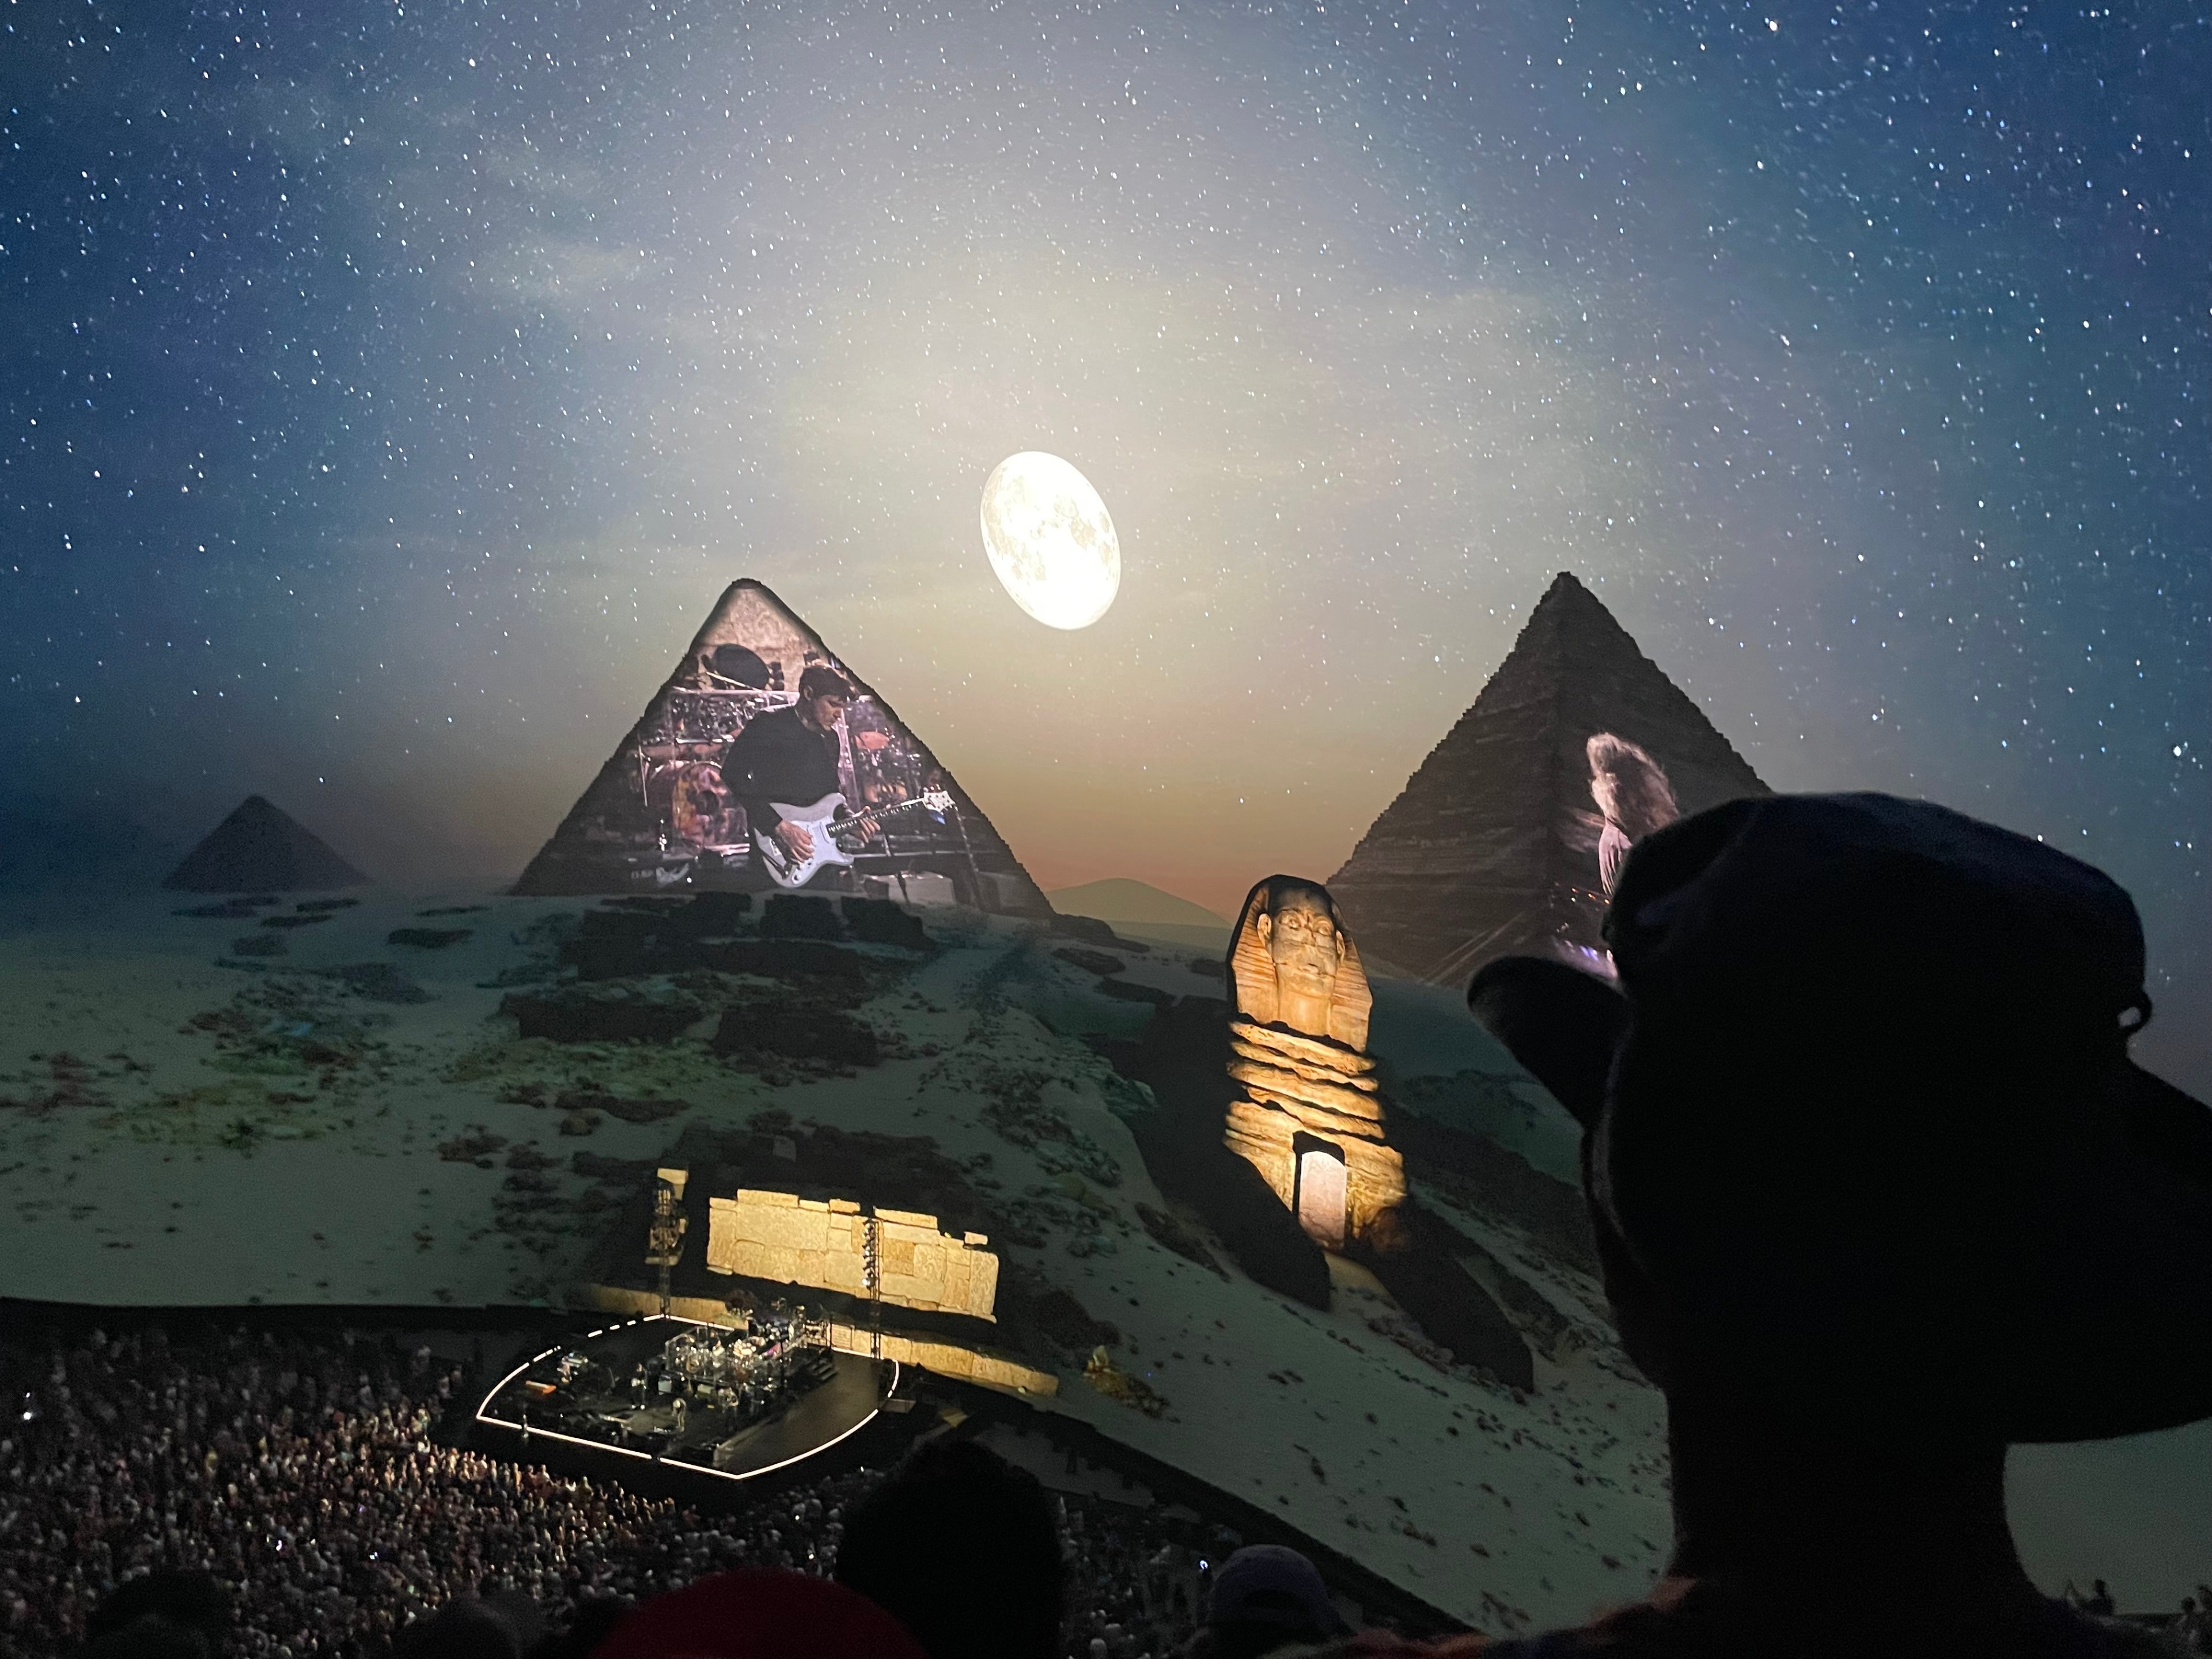 A night concert features a stage below the Pyramids and Sphinx, with projected images, a full moon, and a starry sky, viewed by an audience in the foreground.